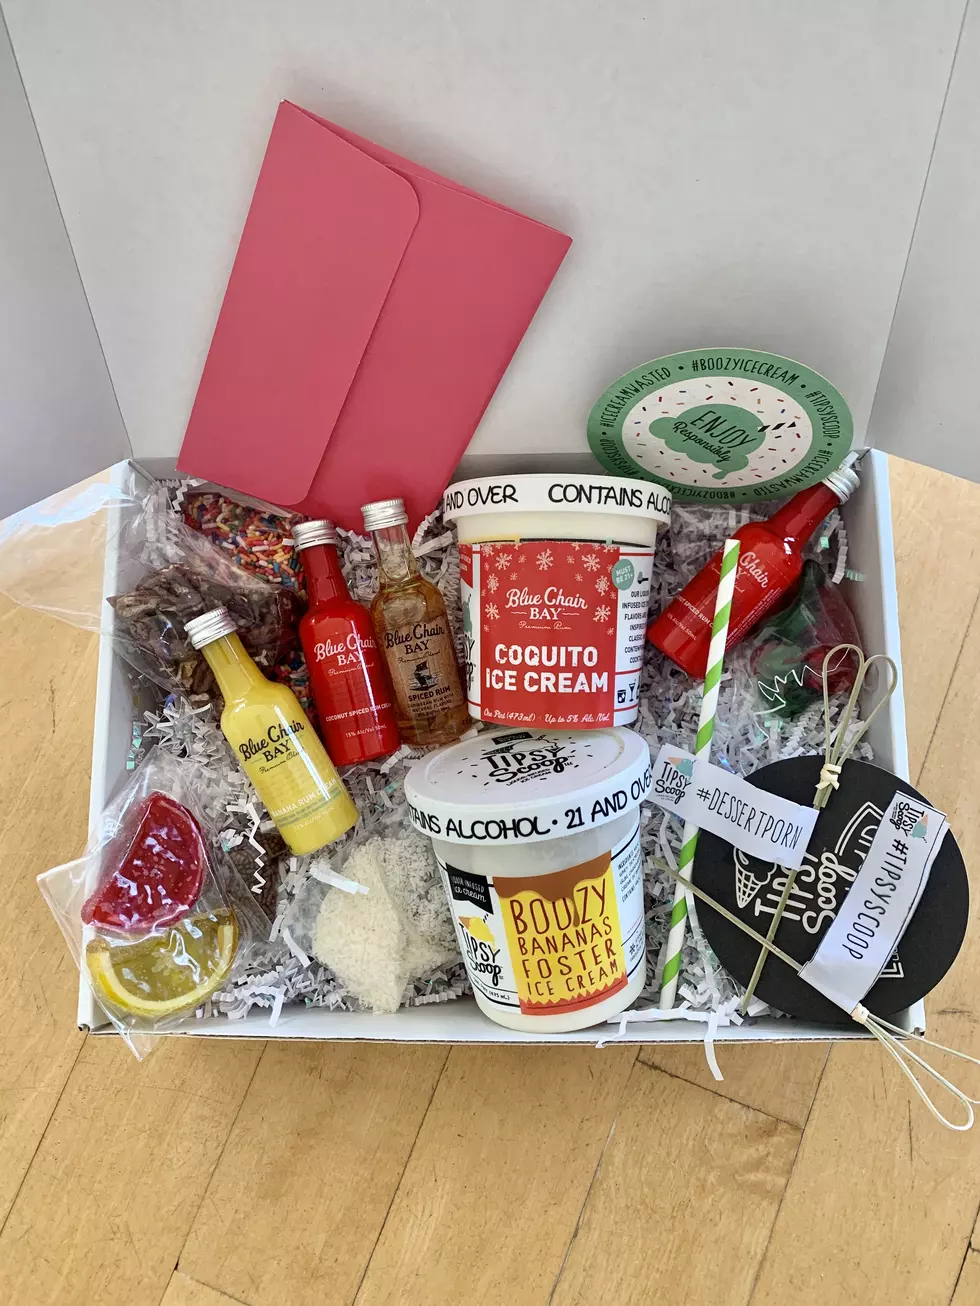 This is The Ultimate Holiday Cheers Ice Cream Cocktail Kit!